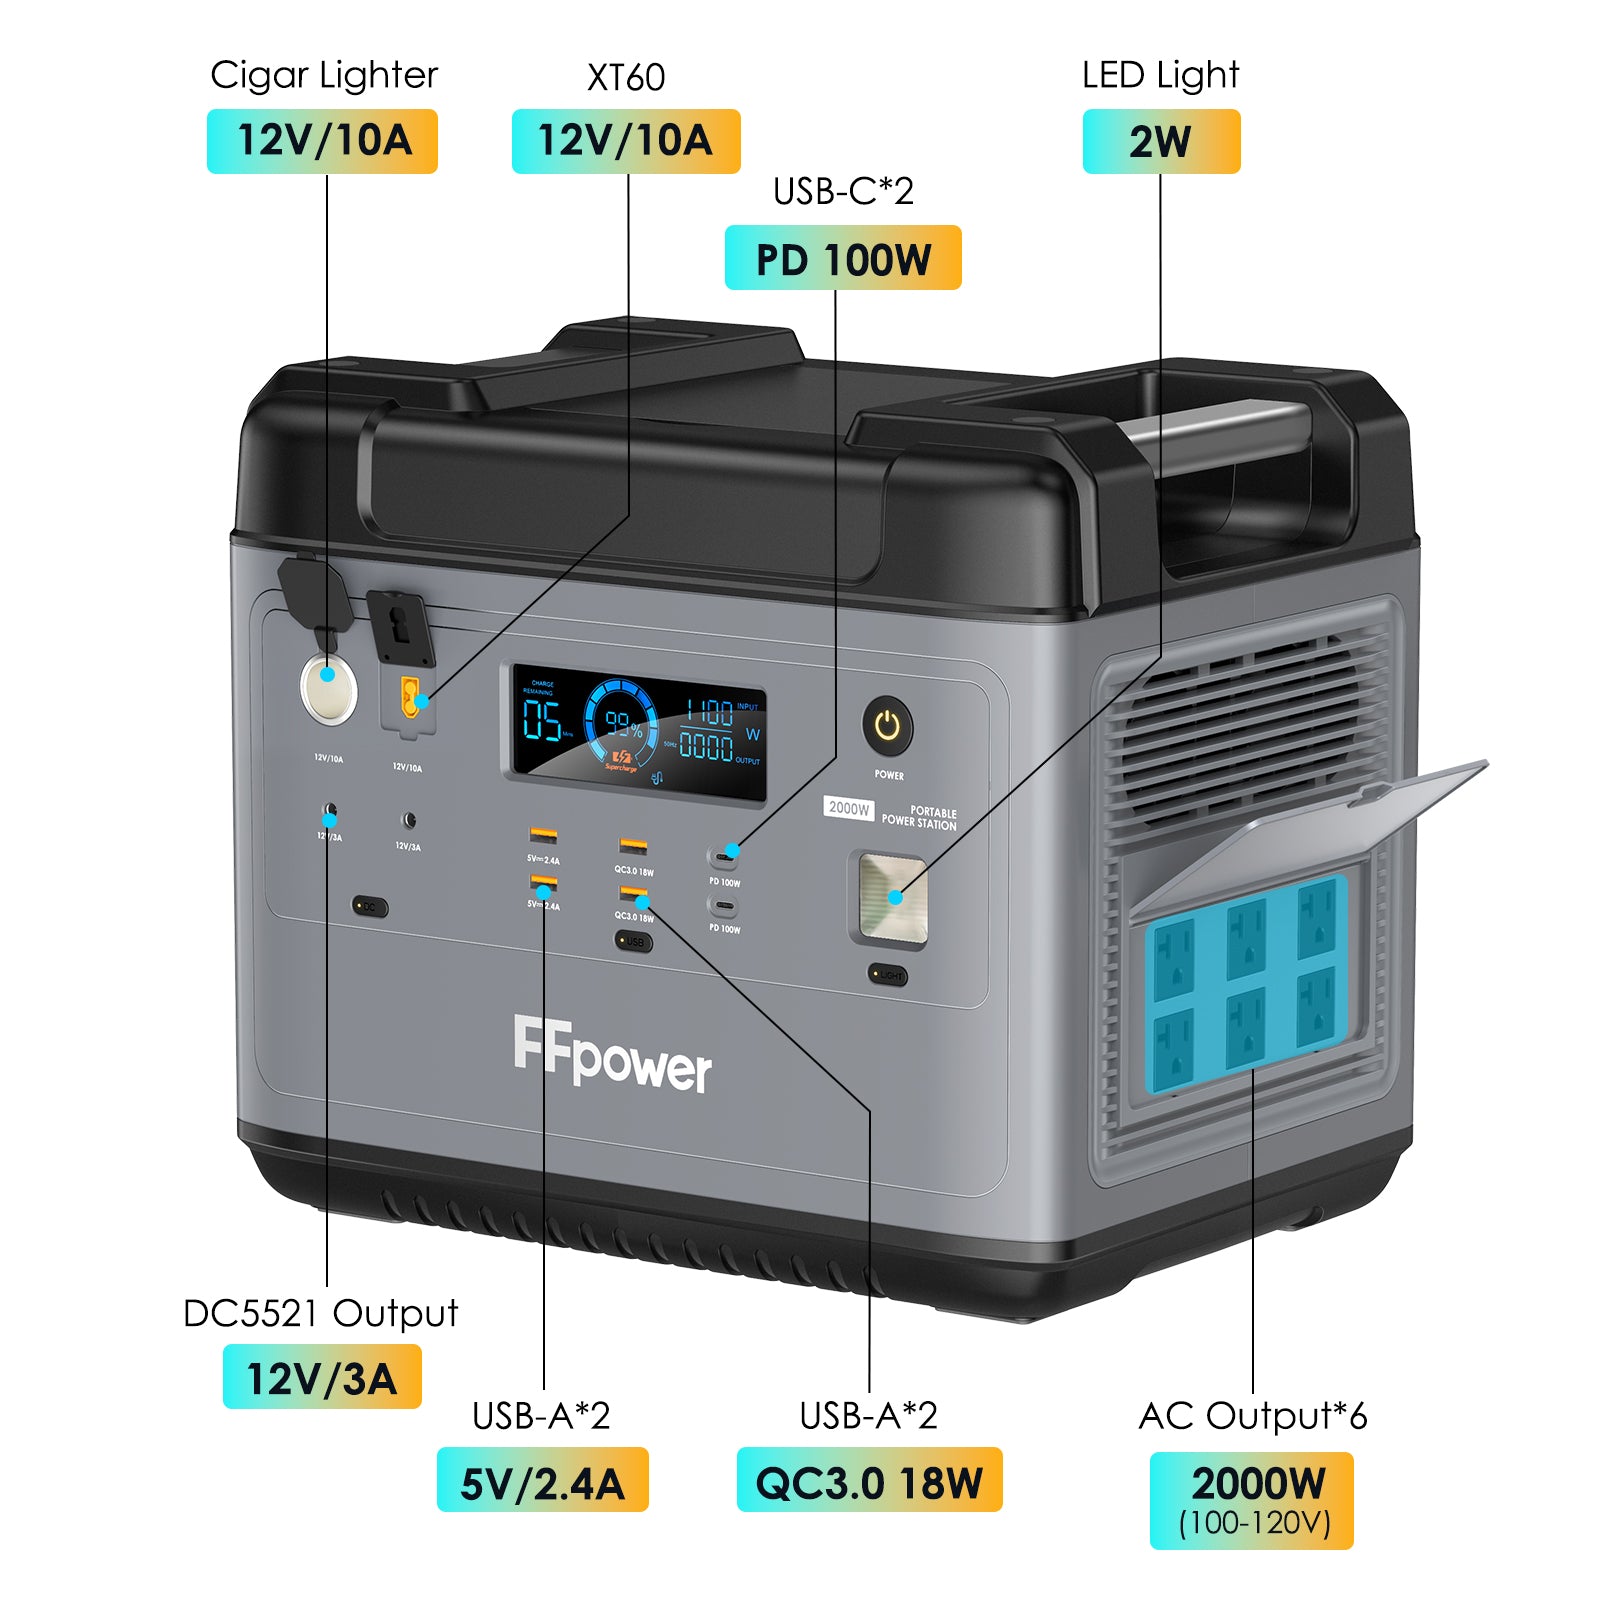 FFpower P2001 Portable Power Station 2000Wh